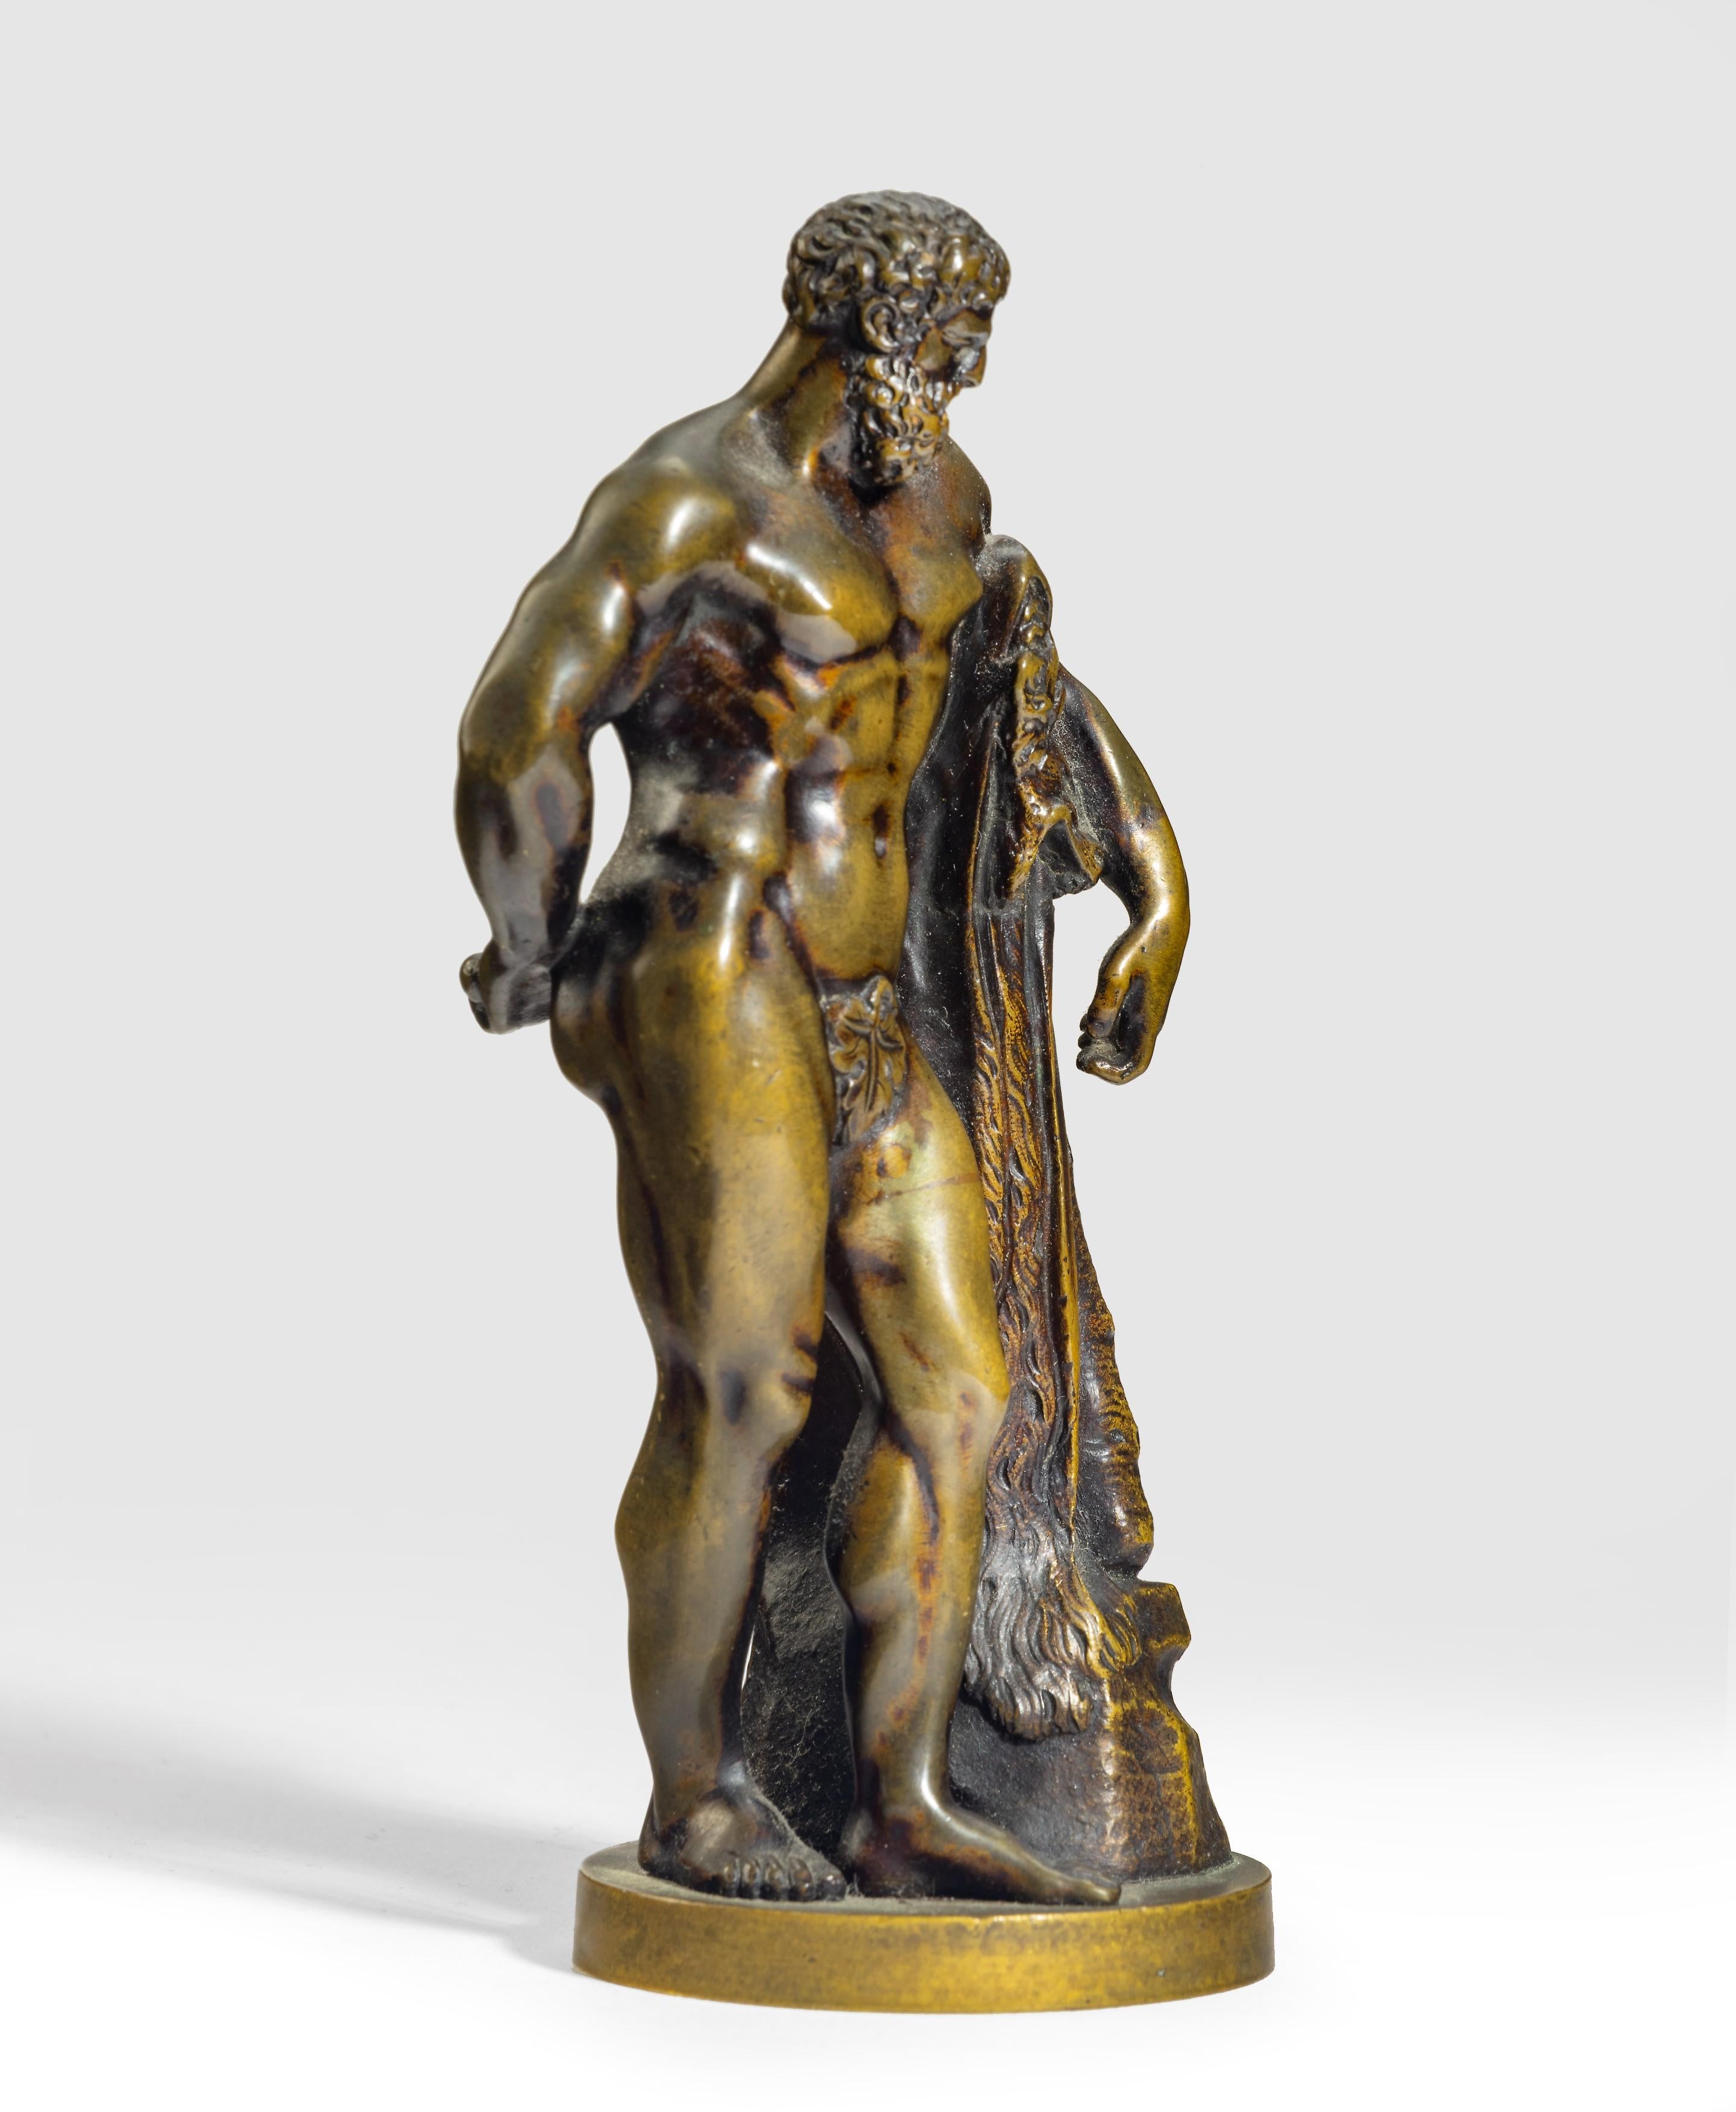 A Grand Tour bronze model of 'The Farnese Hercules', After the Antique - Sculpture by Unknown